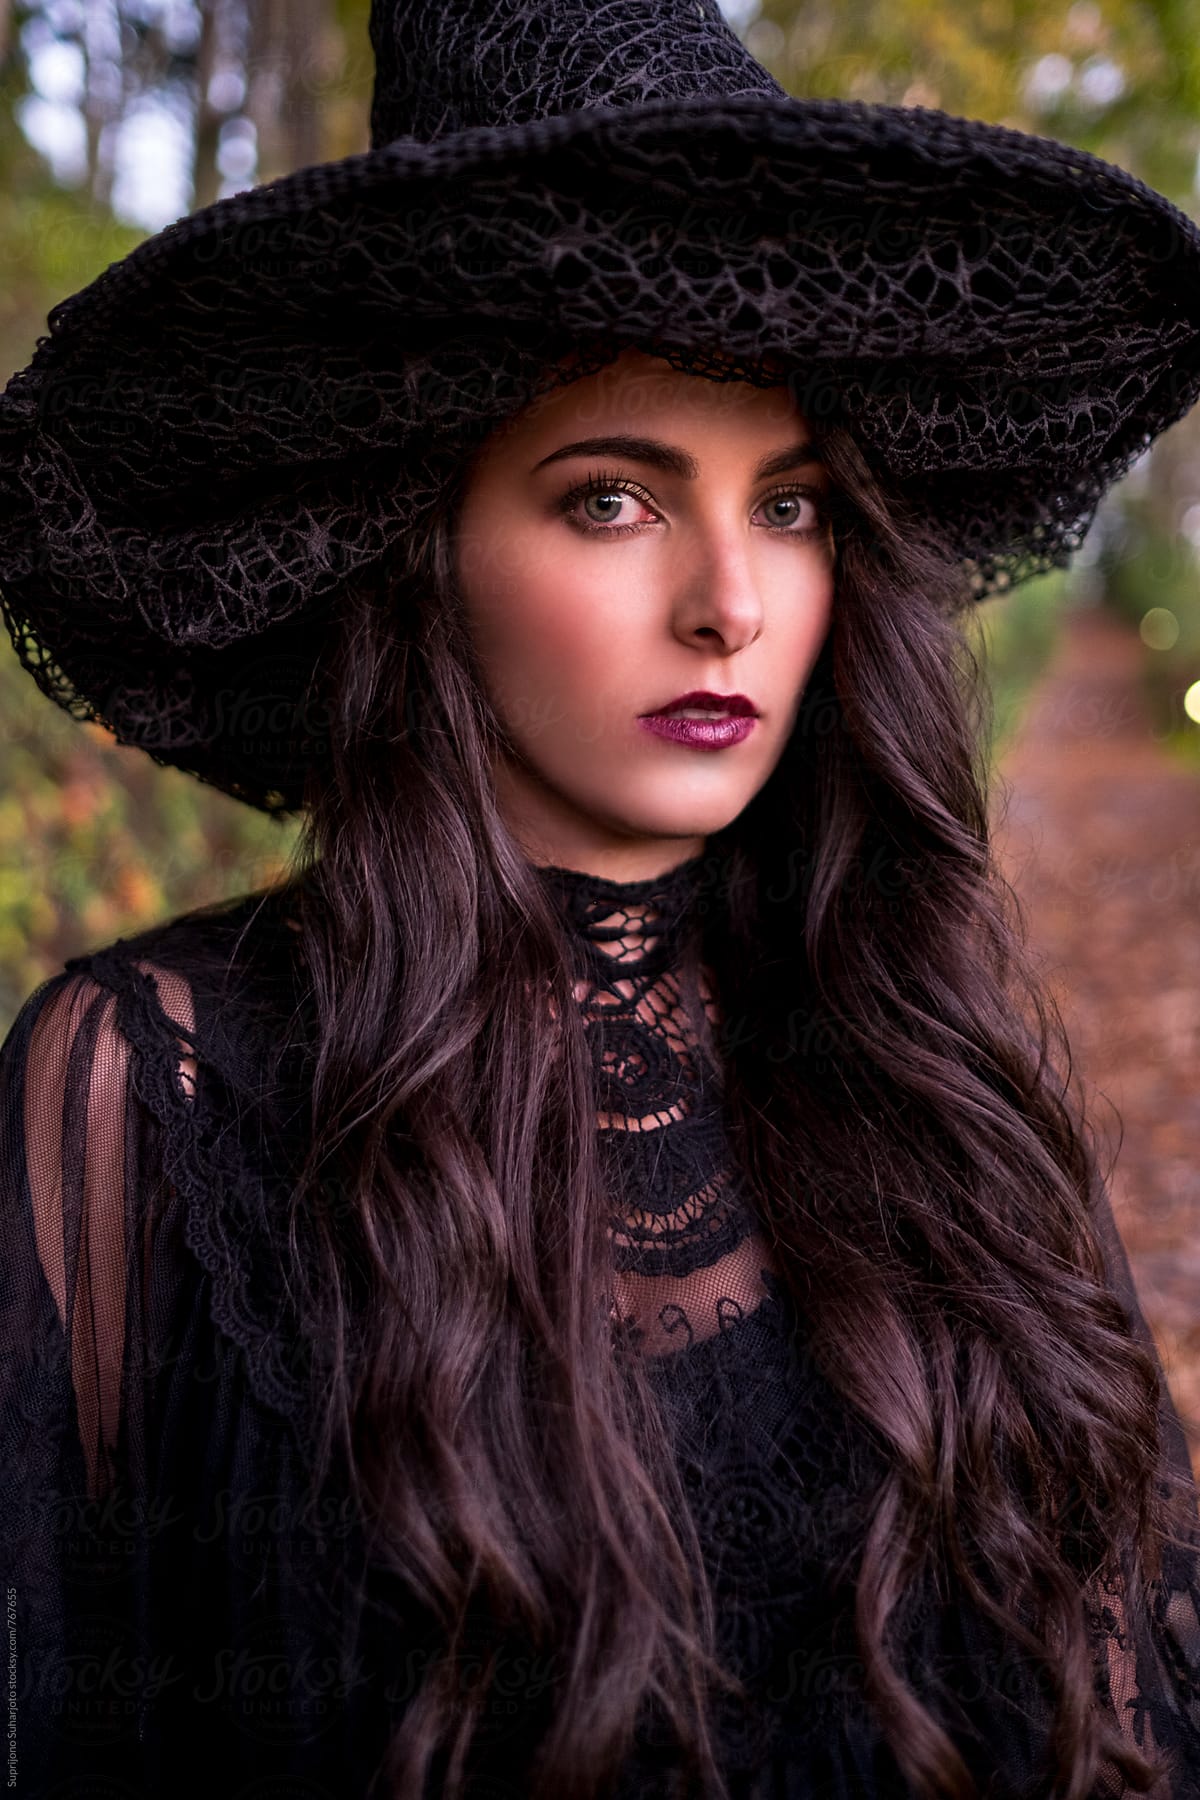 Killer Hairstyles for Your Creepy Costumes featured image